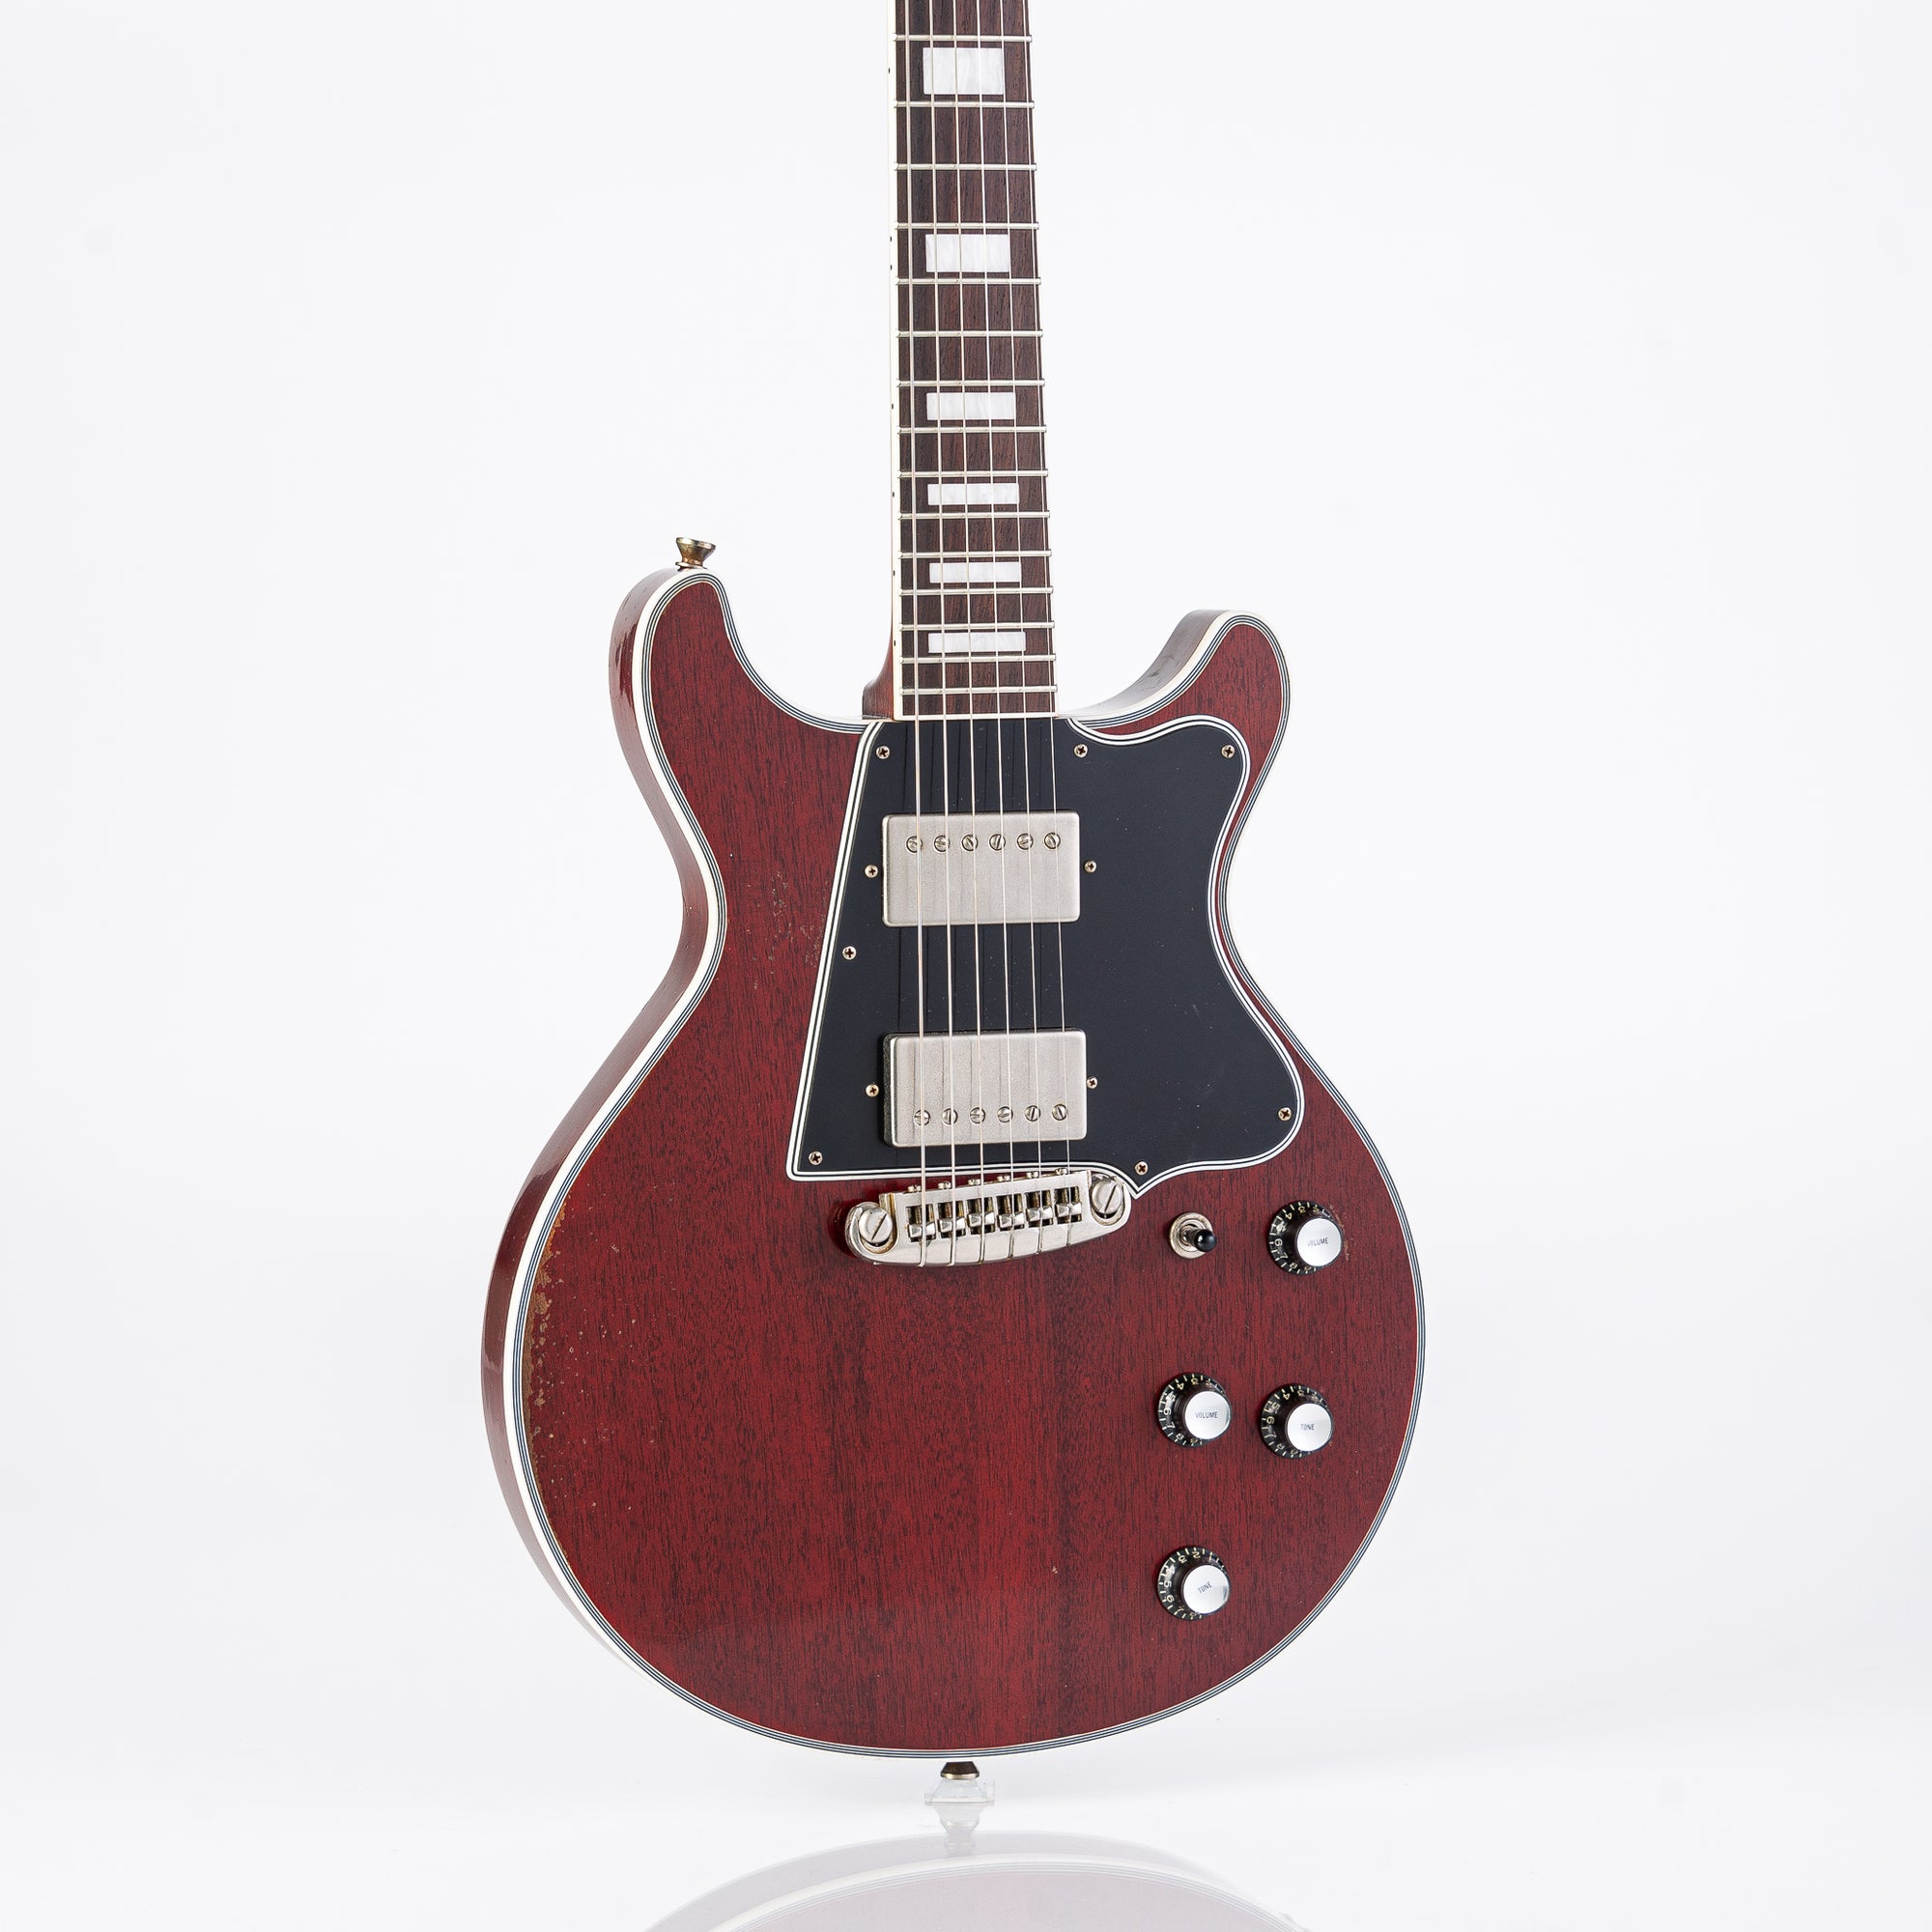 Rock N' Roll Relics Thunders Custom Double Cut Electric Guitar - Aged Cherry